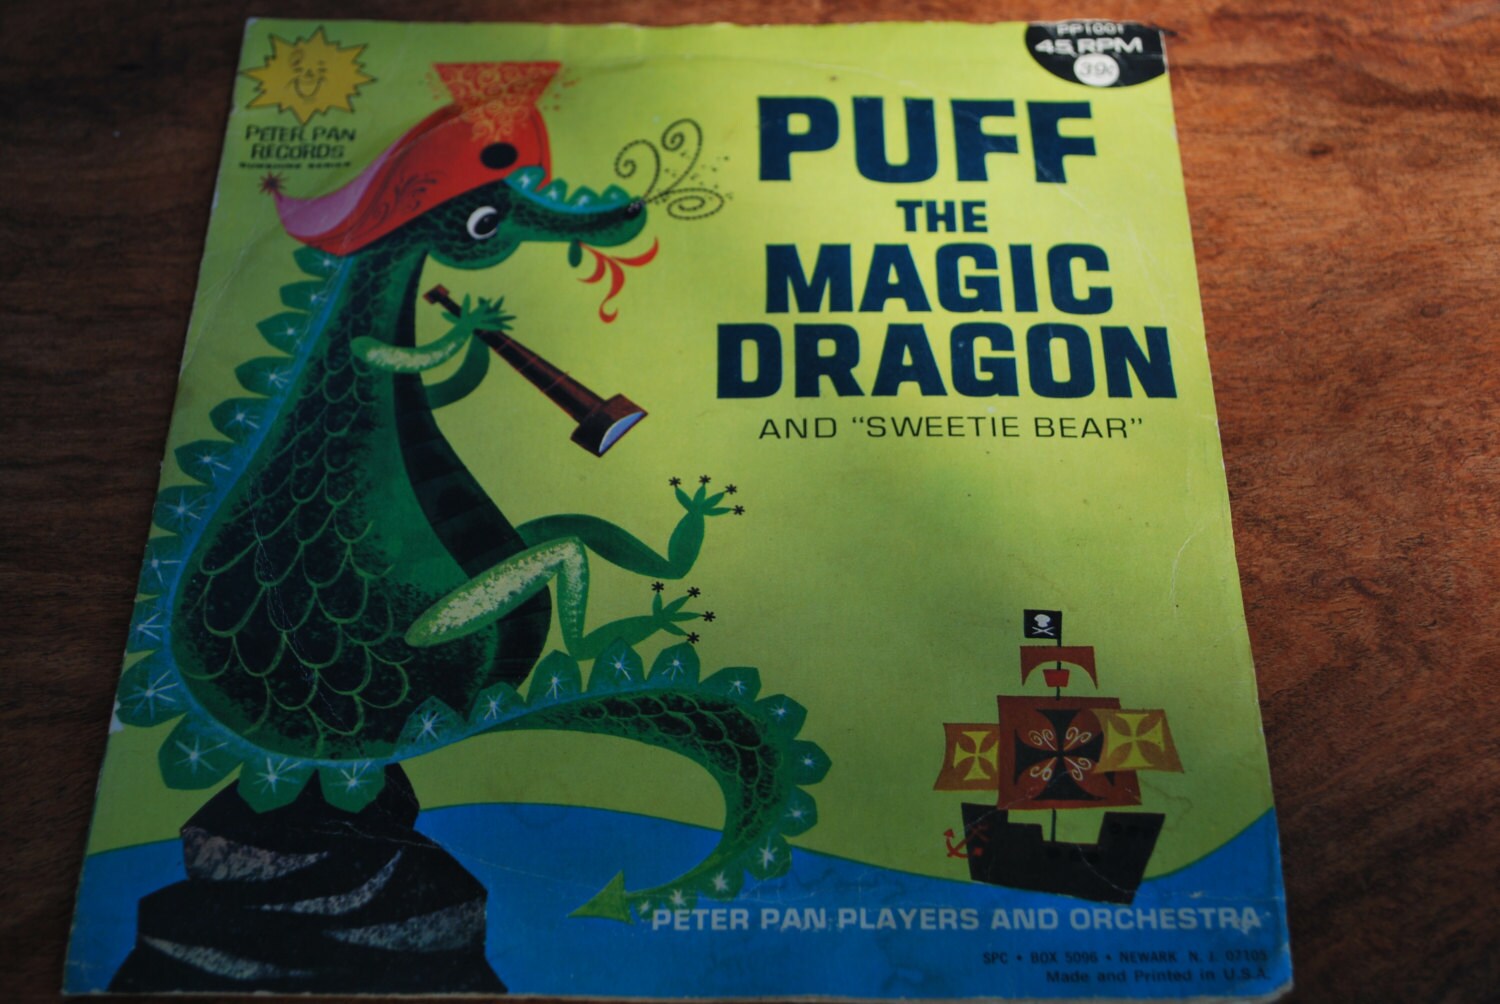 Puff the Magic Dragon Record and Sweetie Bear 45